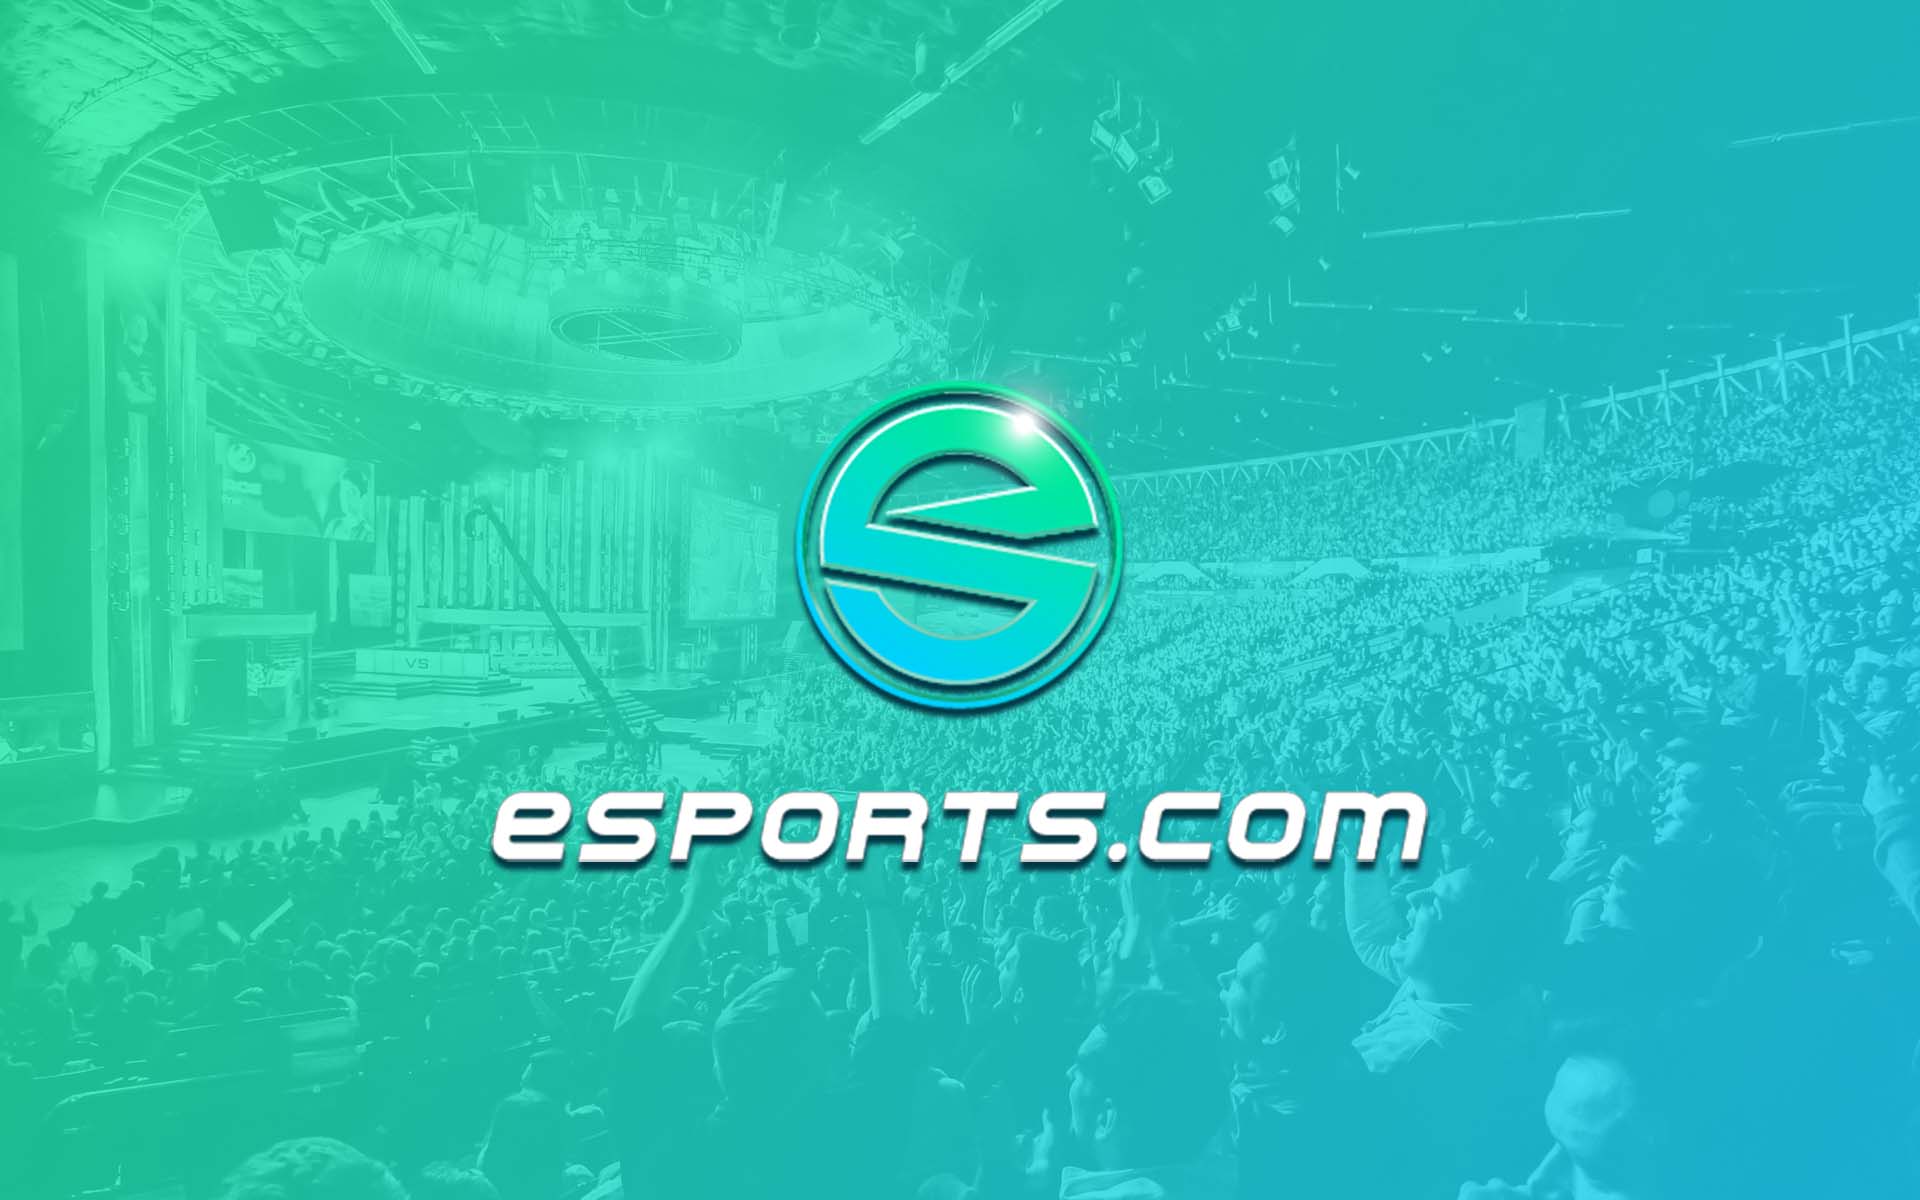 E-Sports – Will EHT be the New Universal Currency for Gamers?